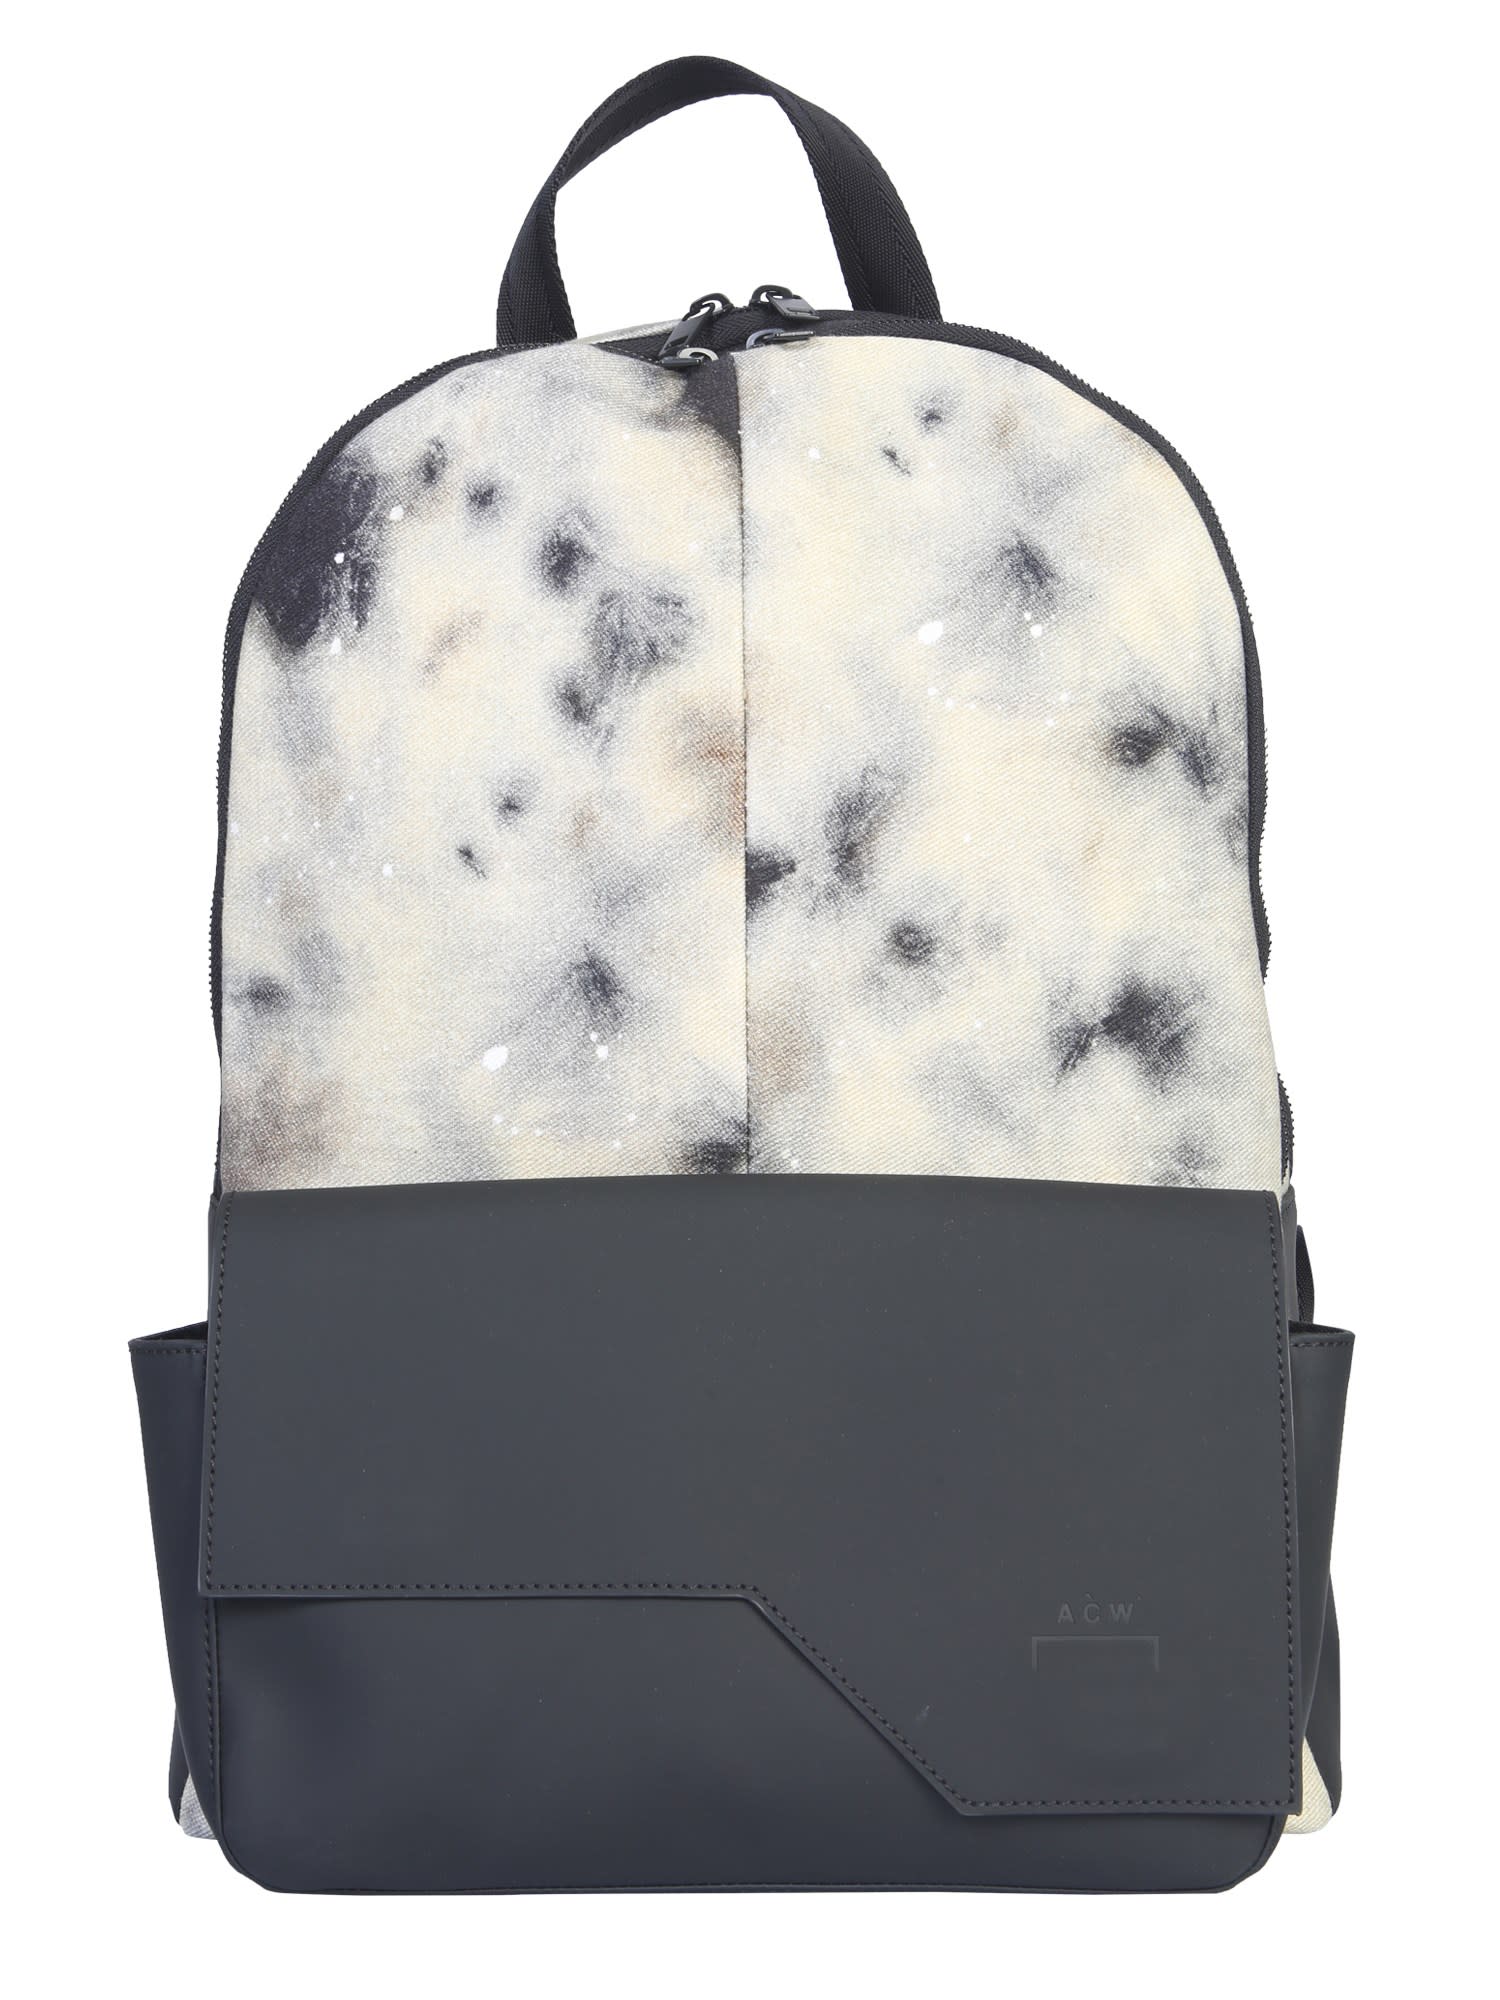 DIESEL CO-LAB BACKPACK WITH A-COLD-WALL,11213498